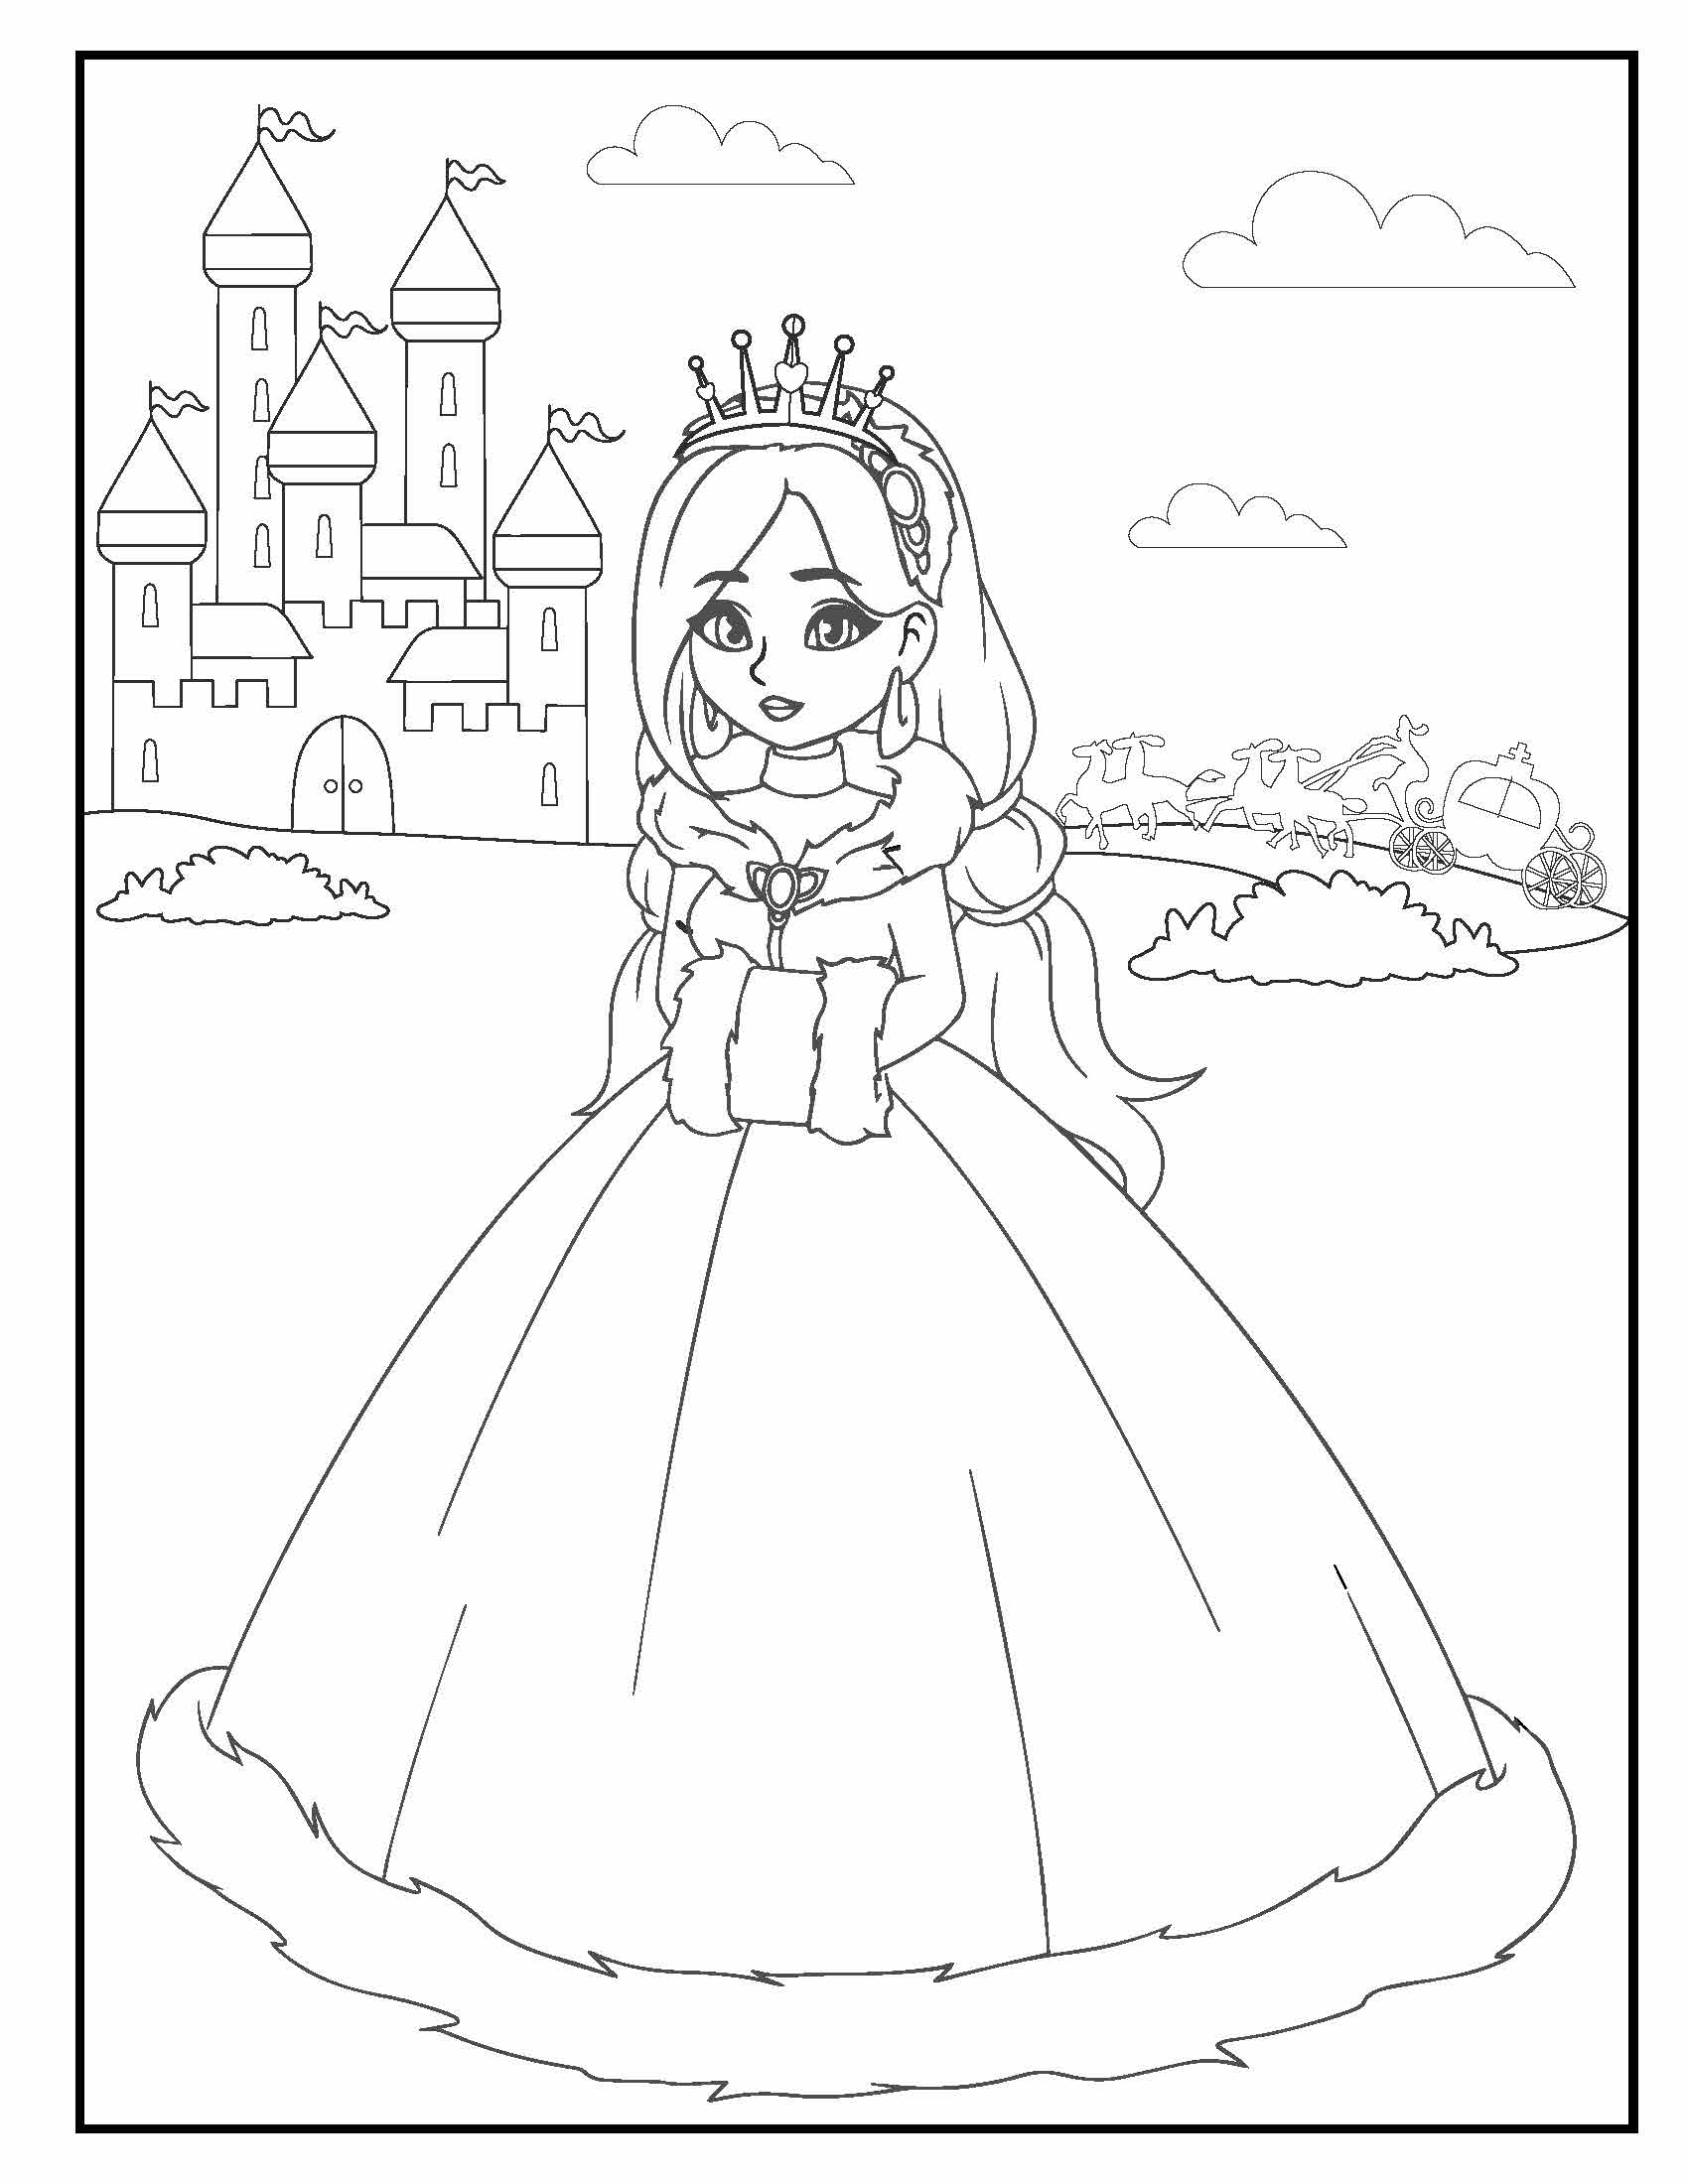 Princess Coloring Book for Kids: Awesome Princess Coloring Book